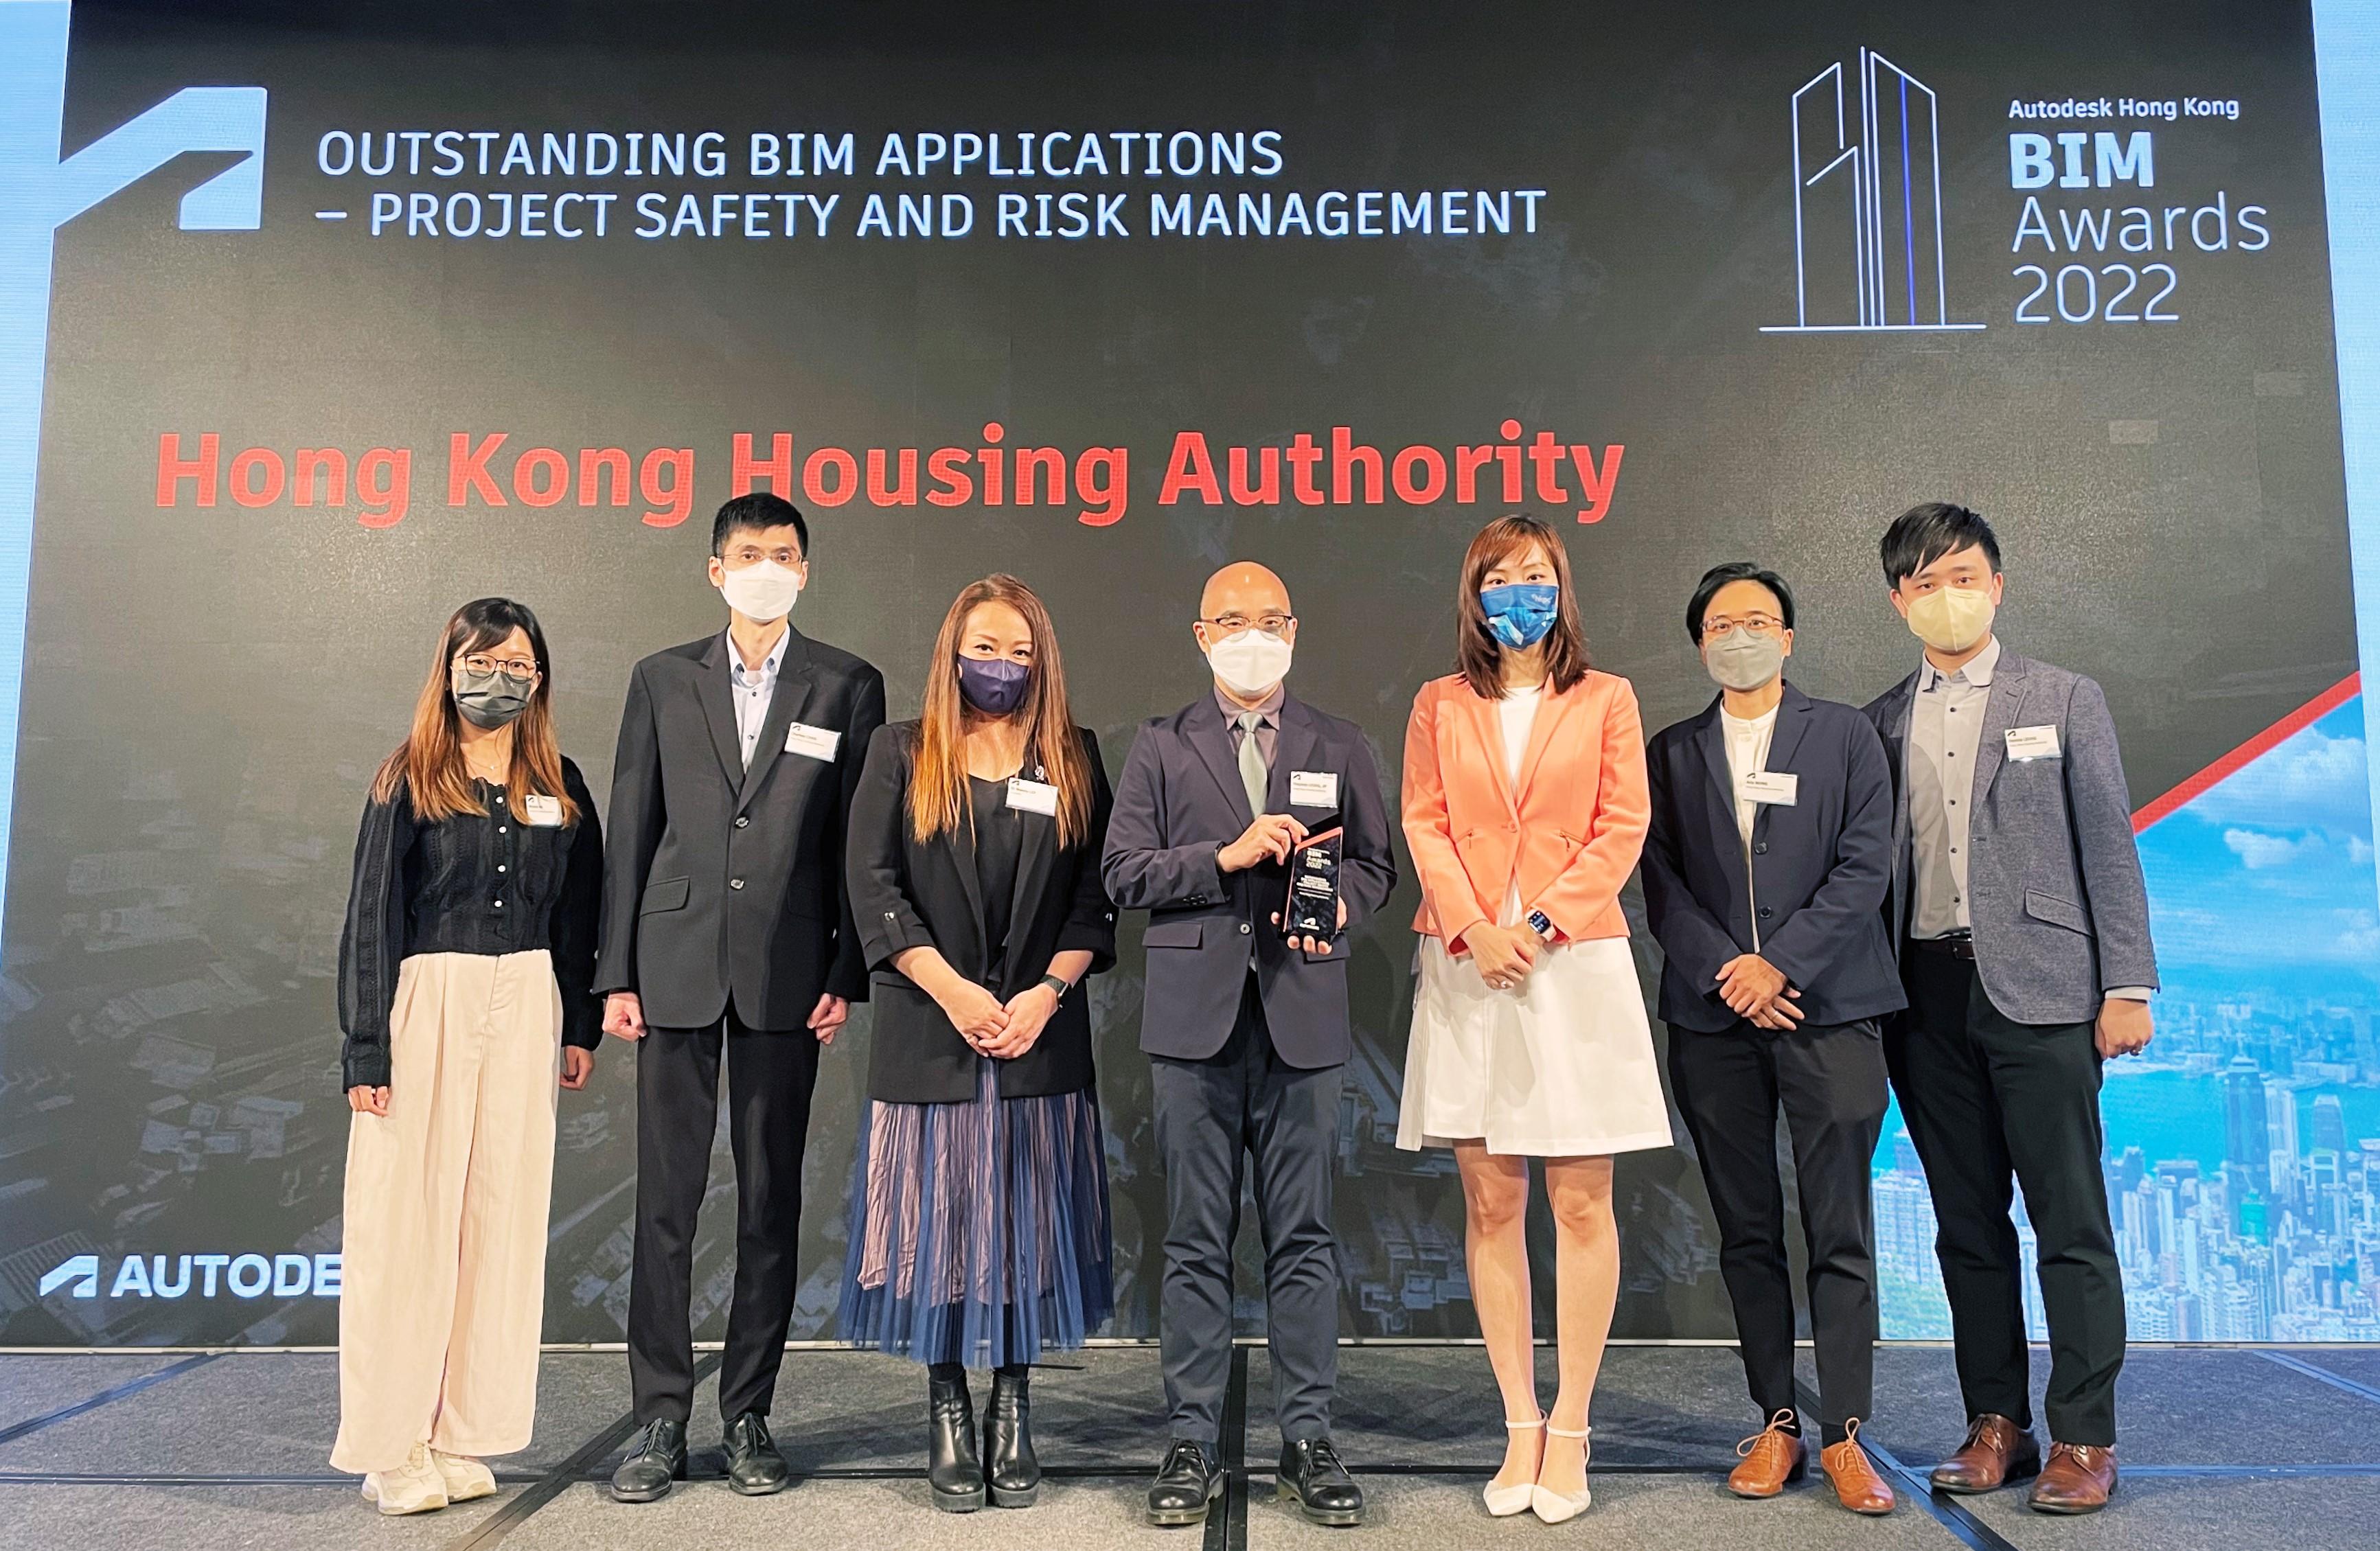 The Hong Kong Housing Authority (HA) received a project award at the Autodesk Hong Kong BIM Awards 2022. The winning project is "Planning for Success: BIM for Construction/ Safety Planning and Risk Mitigation". Photo shows the Deputy Director (Development & Construction), Mr Stephen Leung (centre), with the award-winning HA project team at the awards presentation ceremony held on October 26.